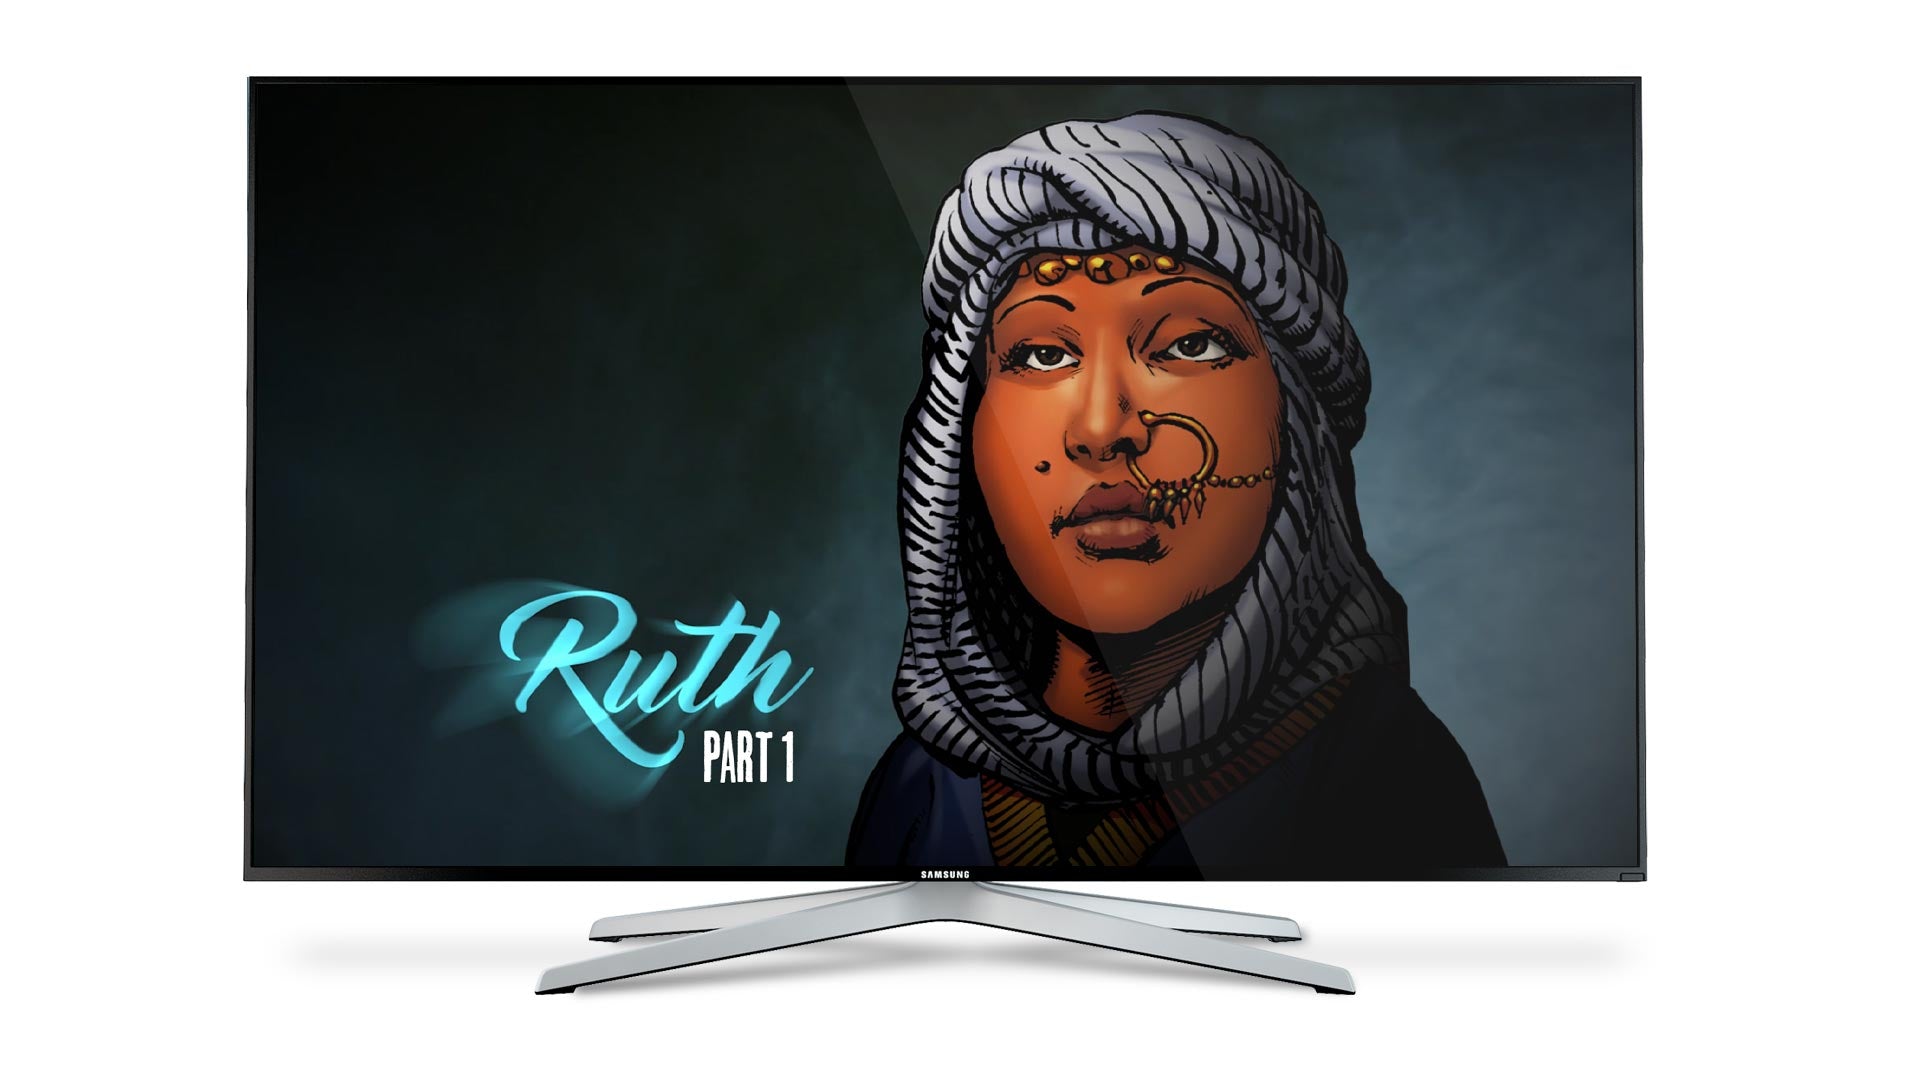 Motion Comic: Ruth Part 1